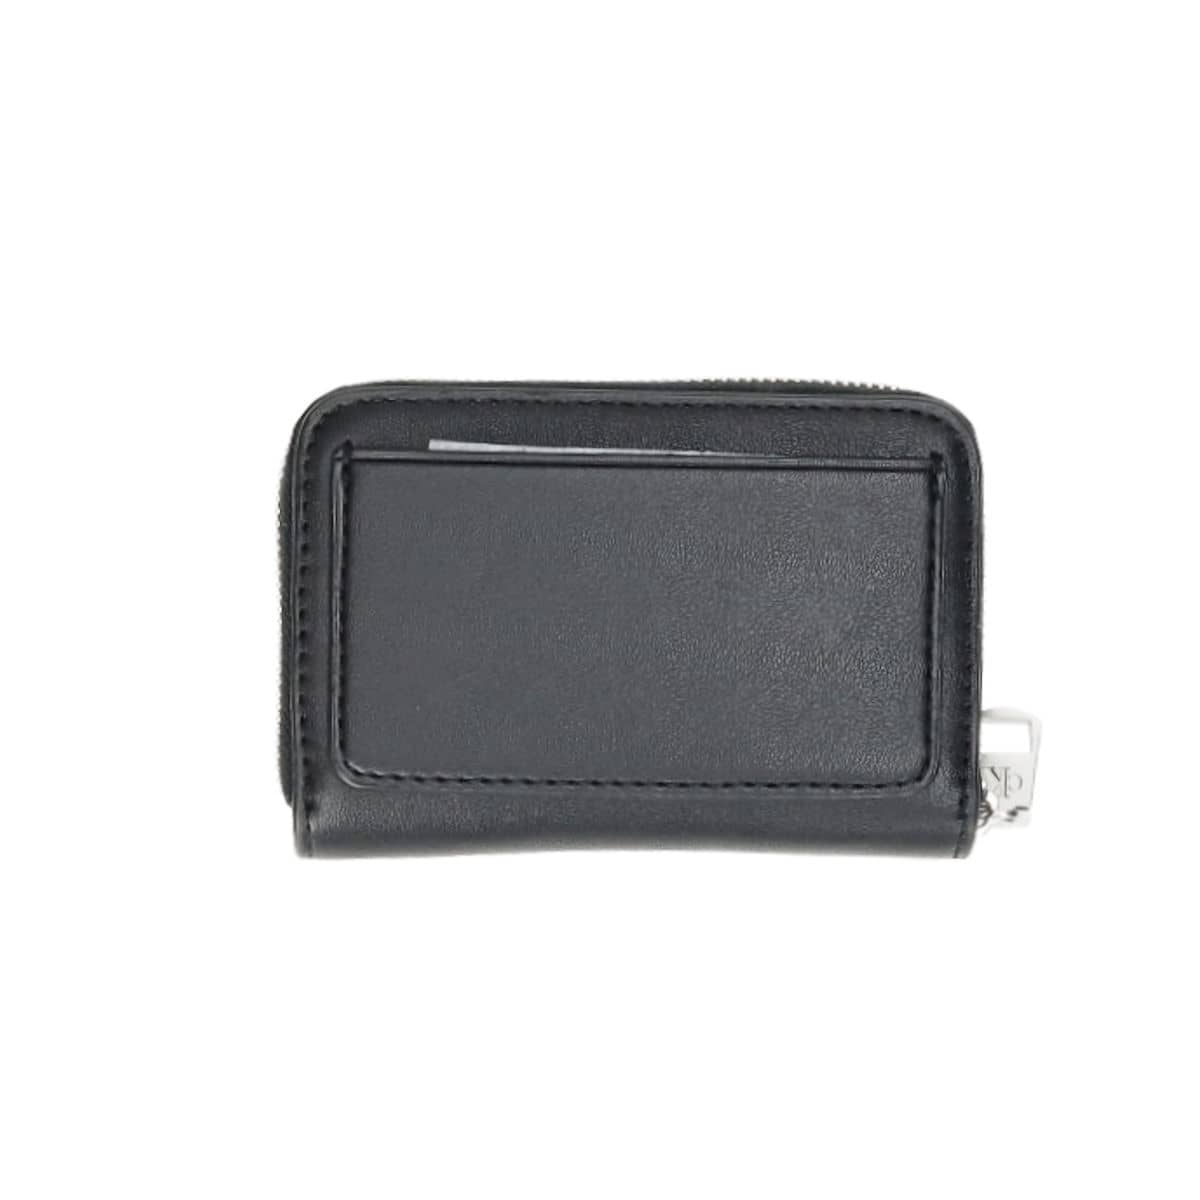  Calvin Klein Women's CK MUST Z/A WALLET X Wallets,Black,OS :  Clothing, Shoes & Jewelry